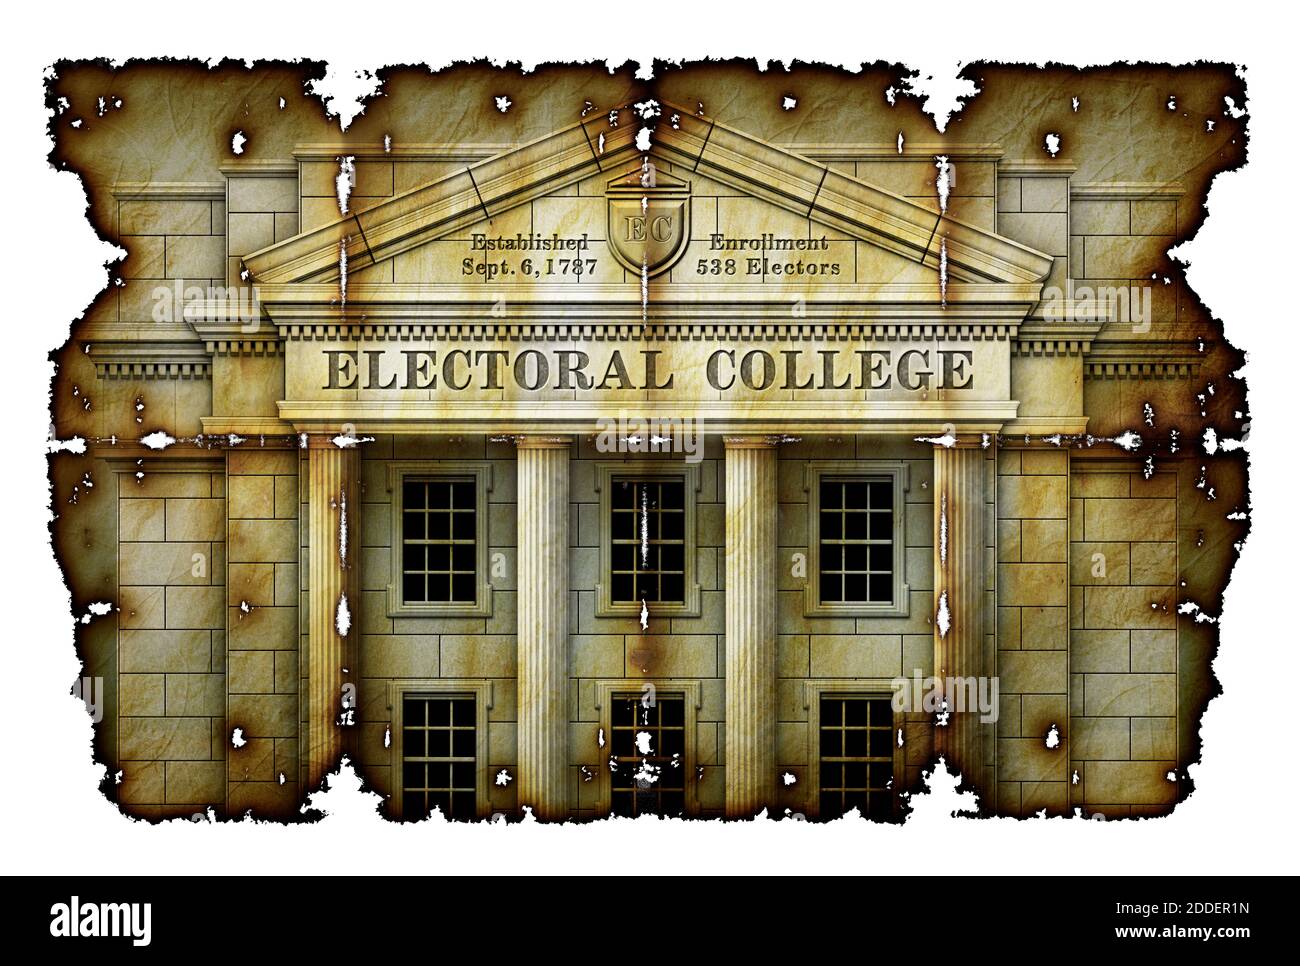 Electoral College system presented as a real physical college building on antique parchment. 3D Illustration Stock Photo